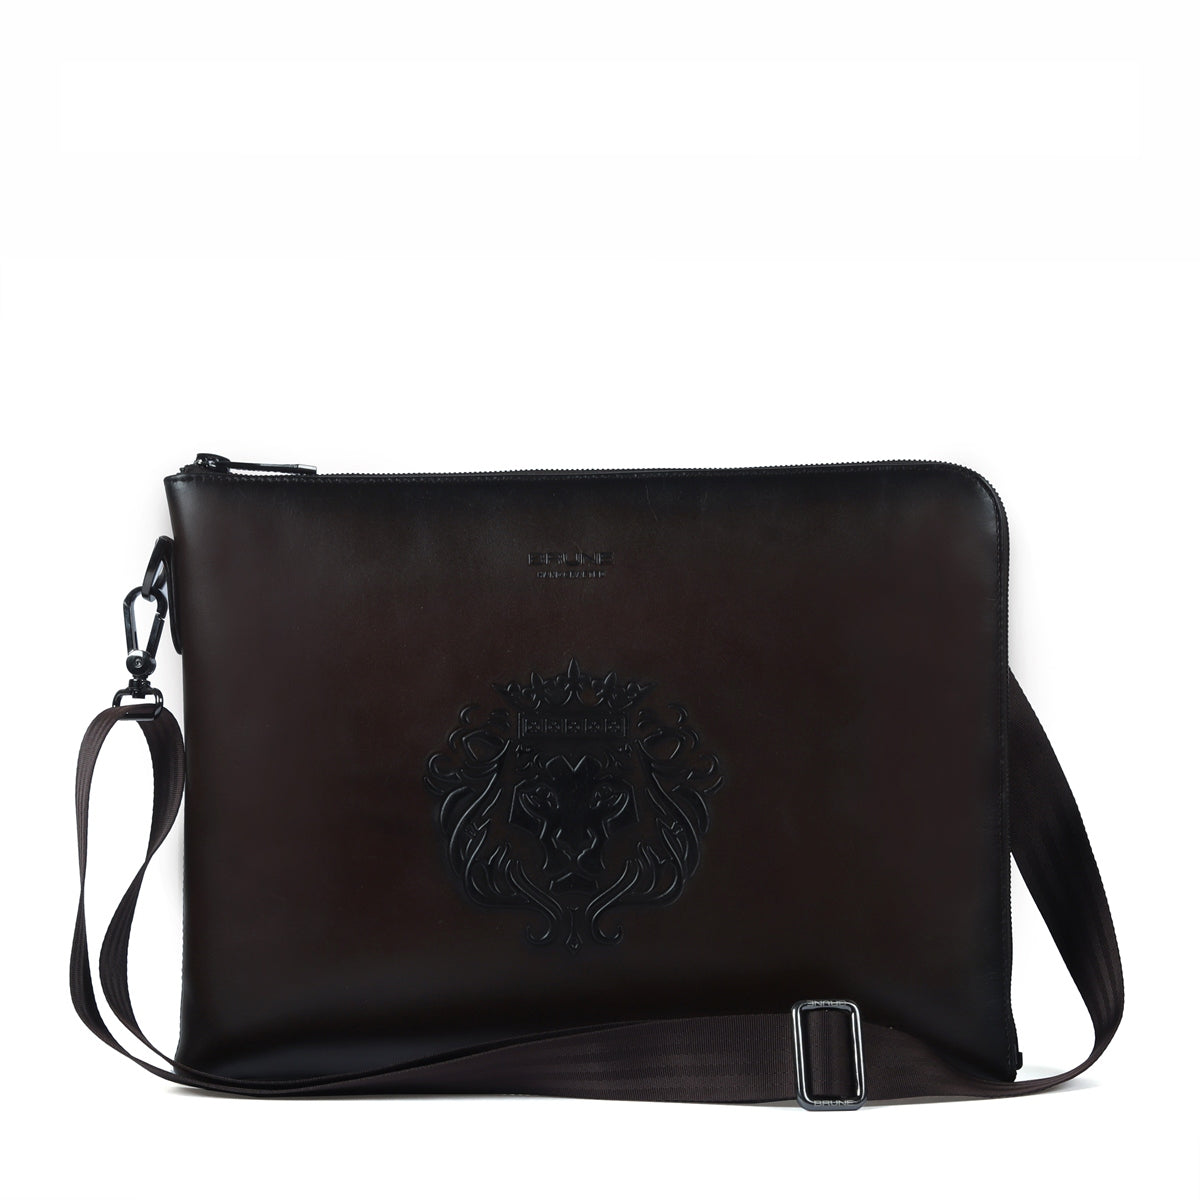 Stylish Laptop Sleeves Embossed Lion Dark Brown Messenger Bag with Zip Compartment By Brune & Bareskin